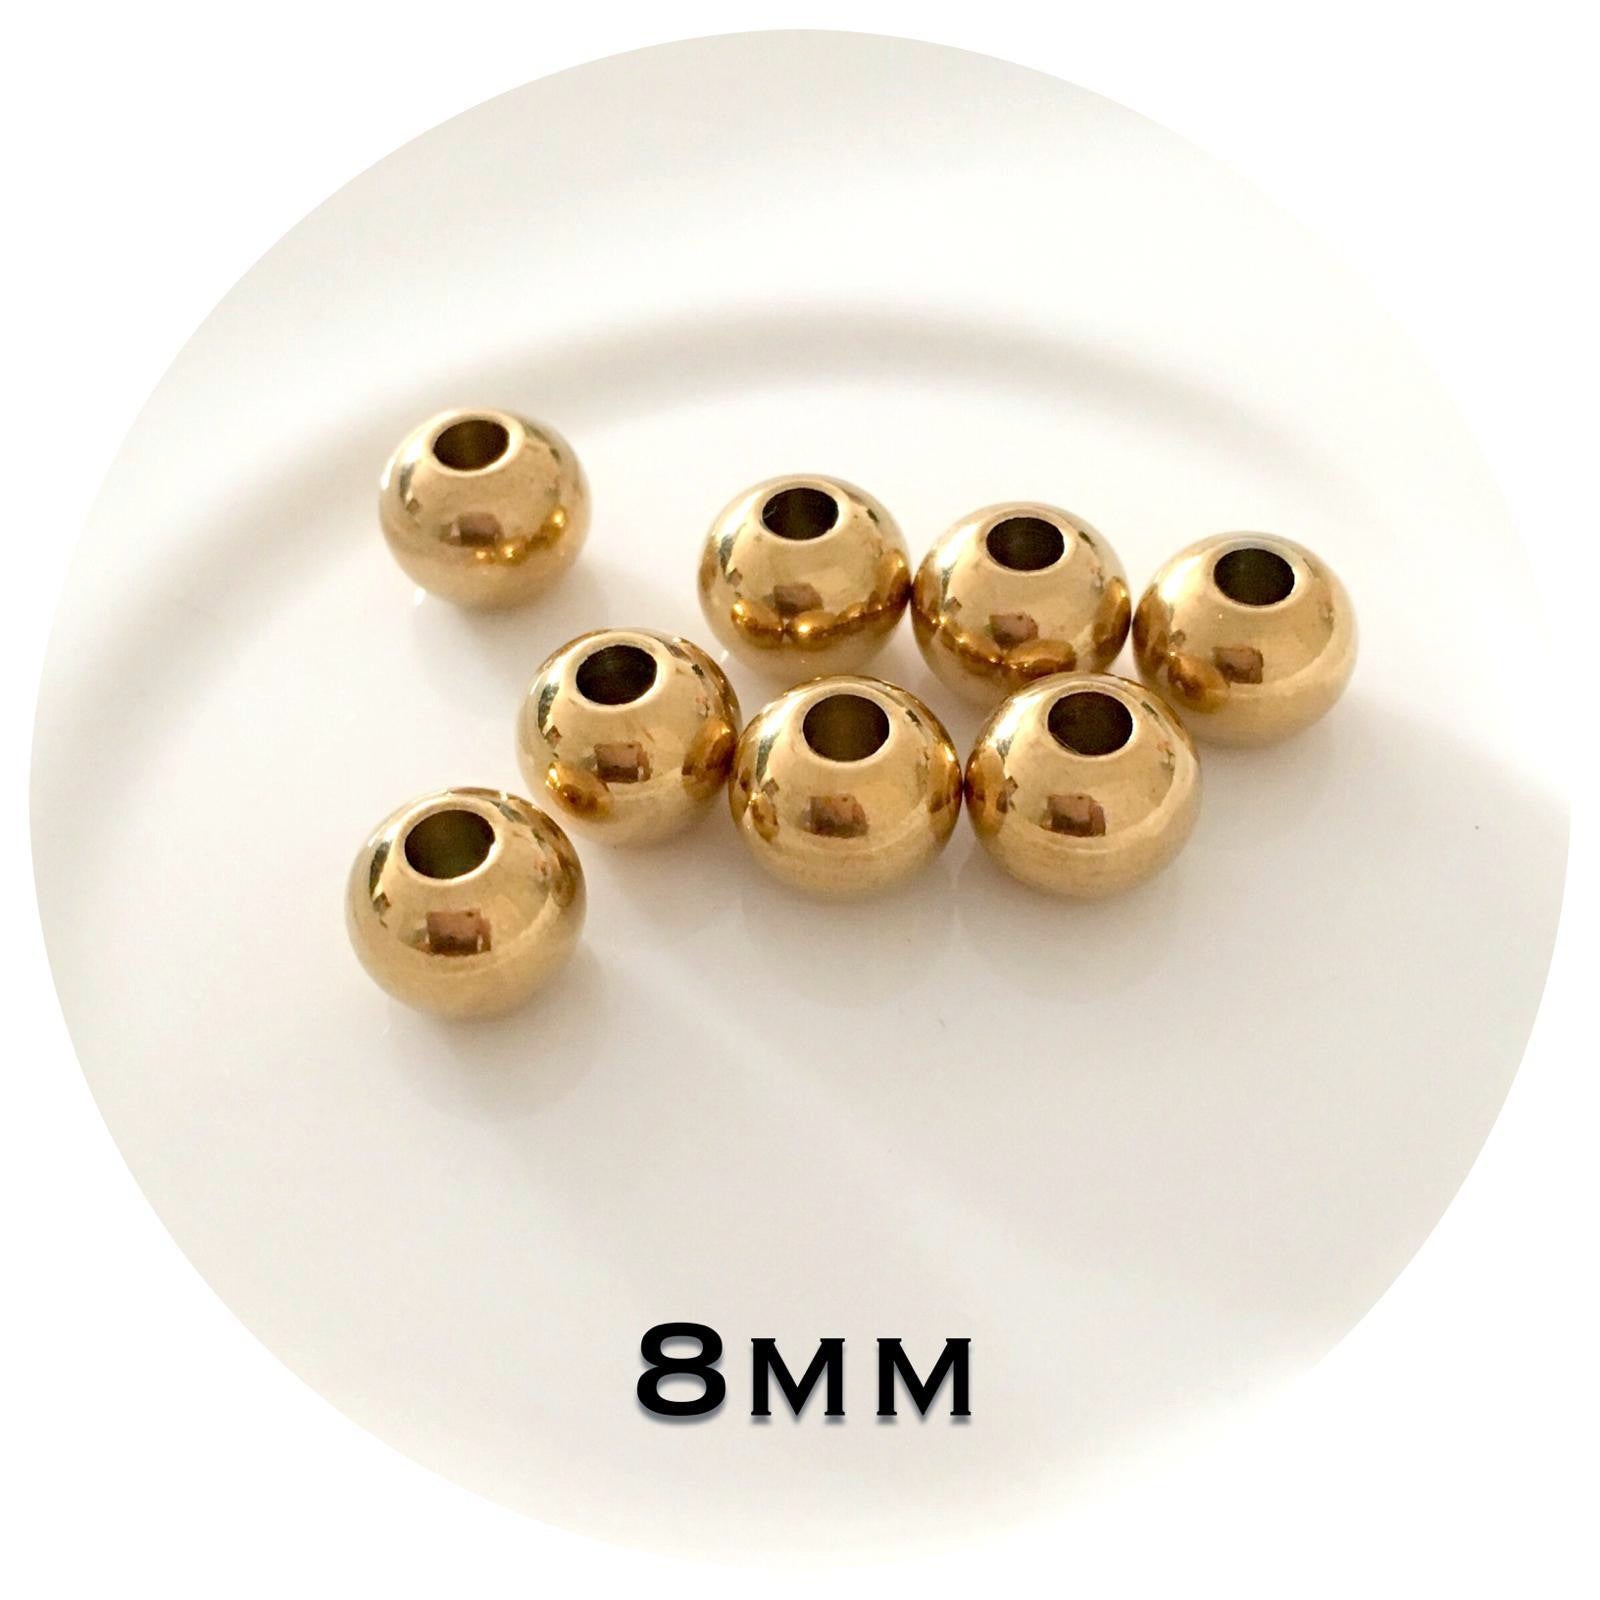 8mm Gold Stainless Steel Beads - Large Hole - 20 Beads